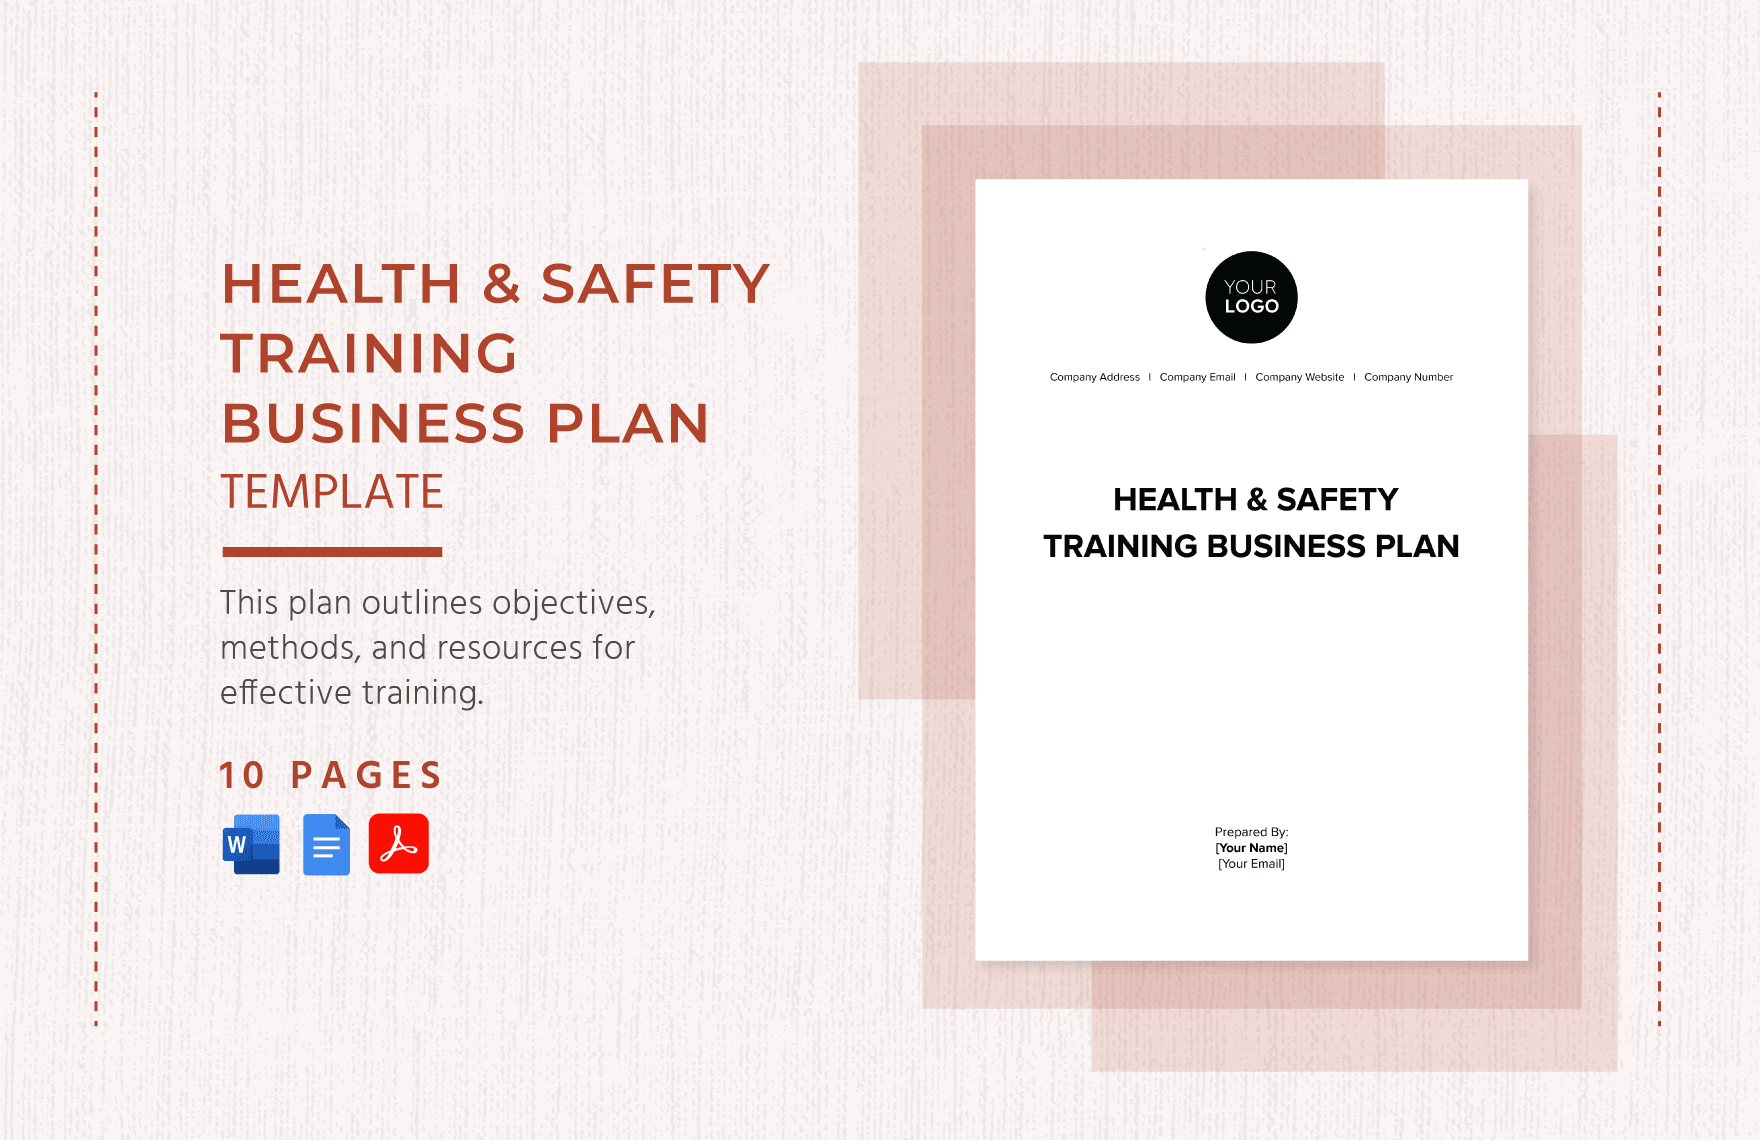 Health & Safety Training Business Plan Template